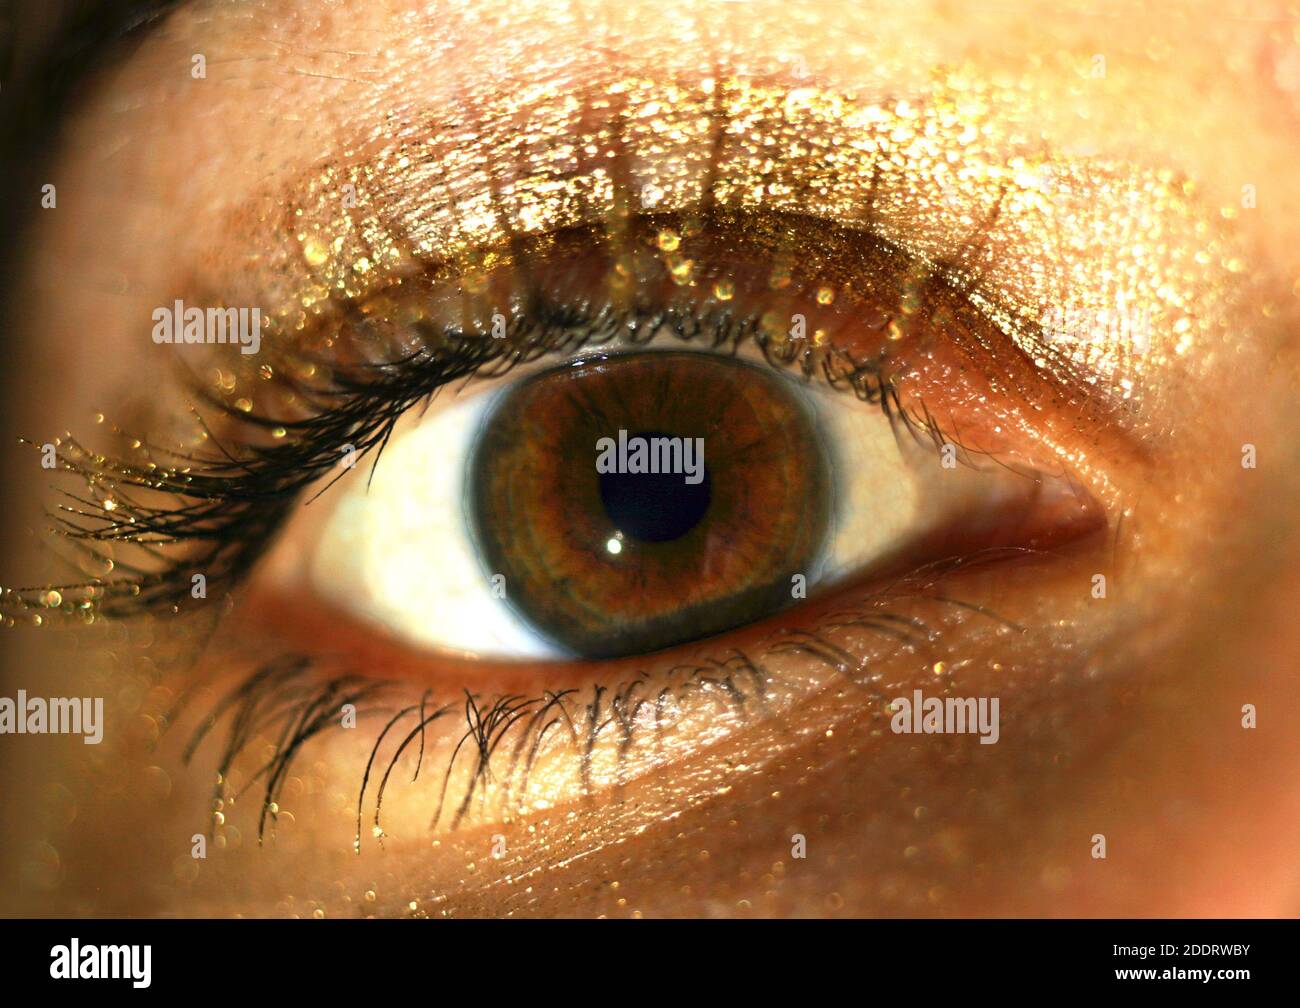 eye of a woman with gold colored make-up, macrophotography Stock Photo